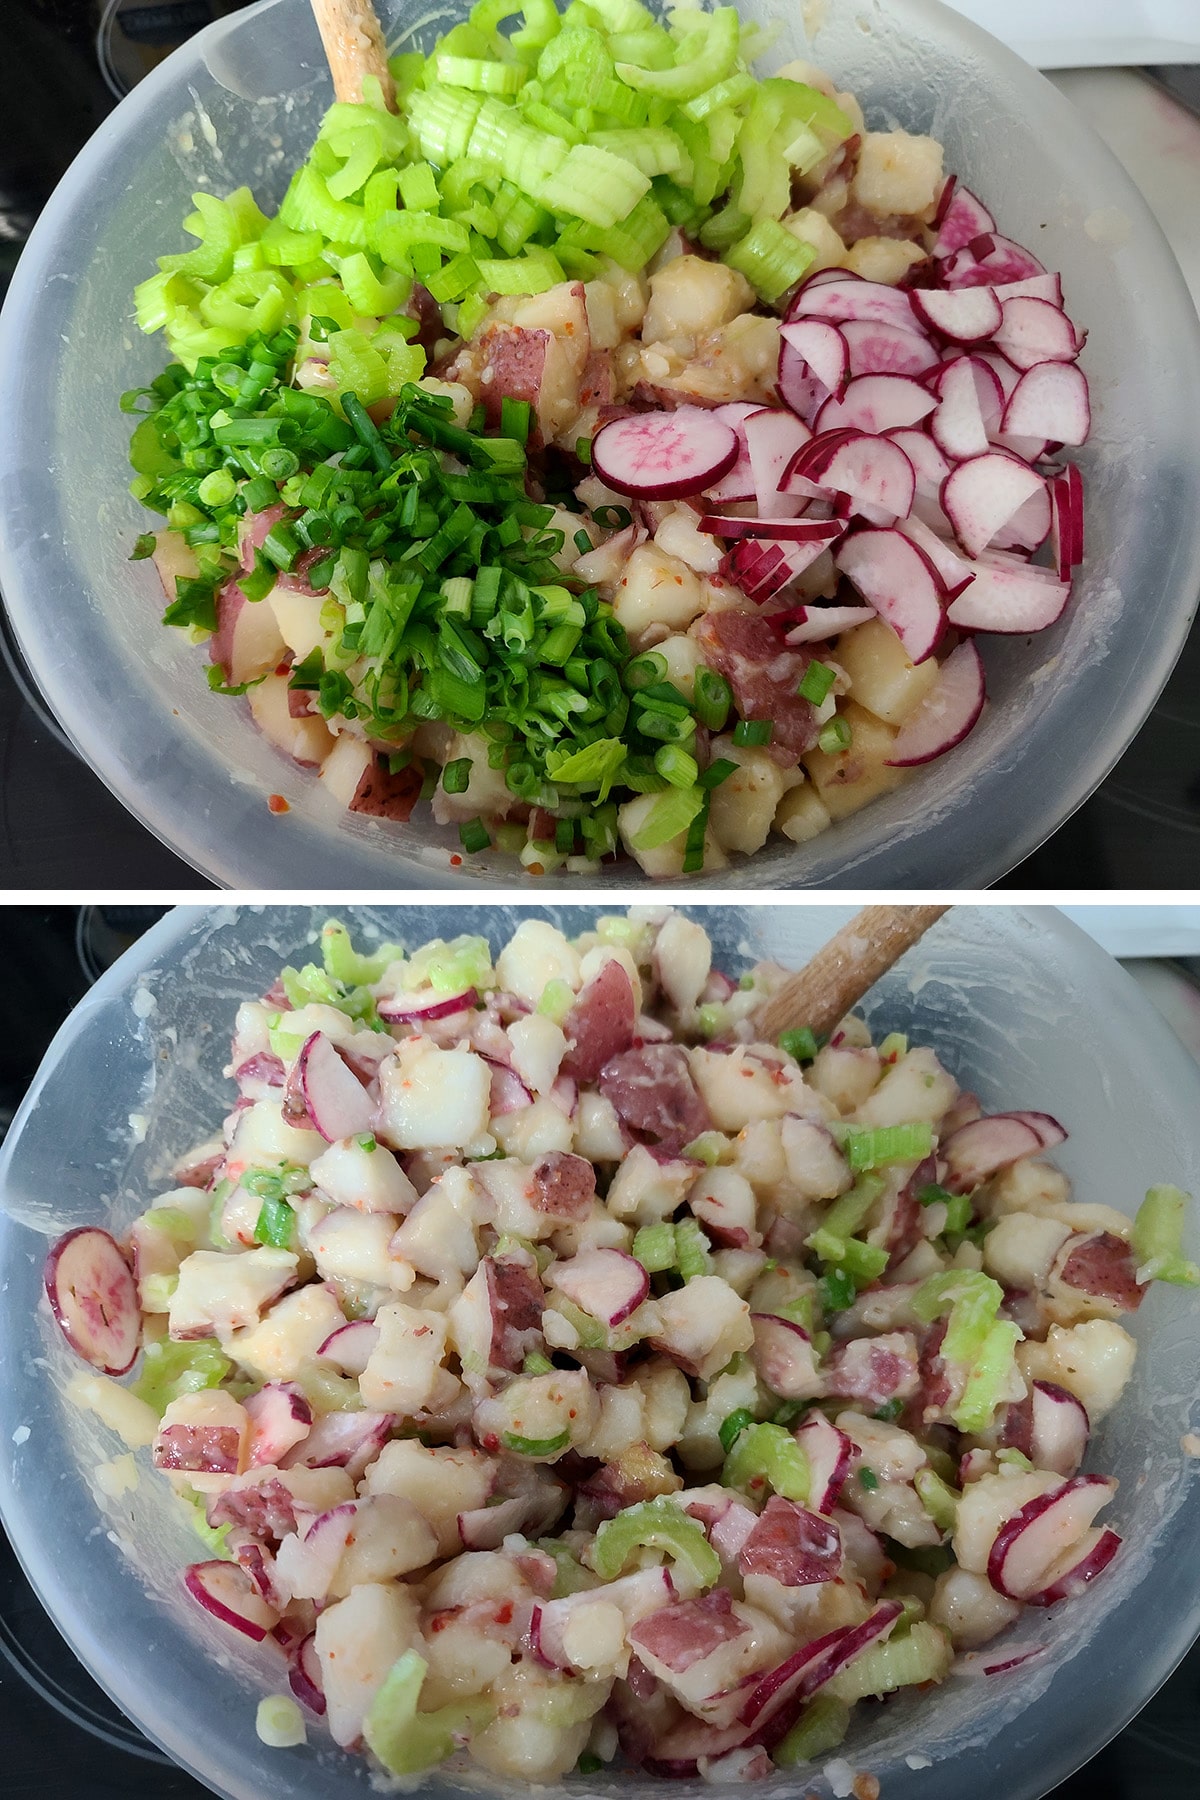 A two part compilation image showing a bowl of cooked potatoes with green onion, celery, and radishes added on top, then the bowl after the ingredients have been mixed.